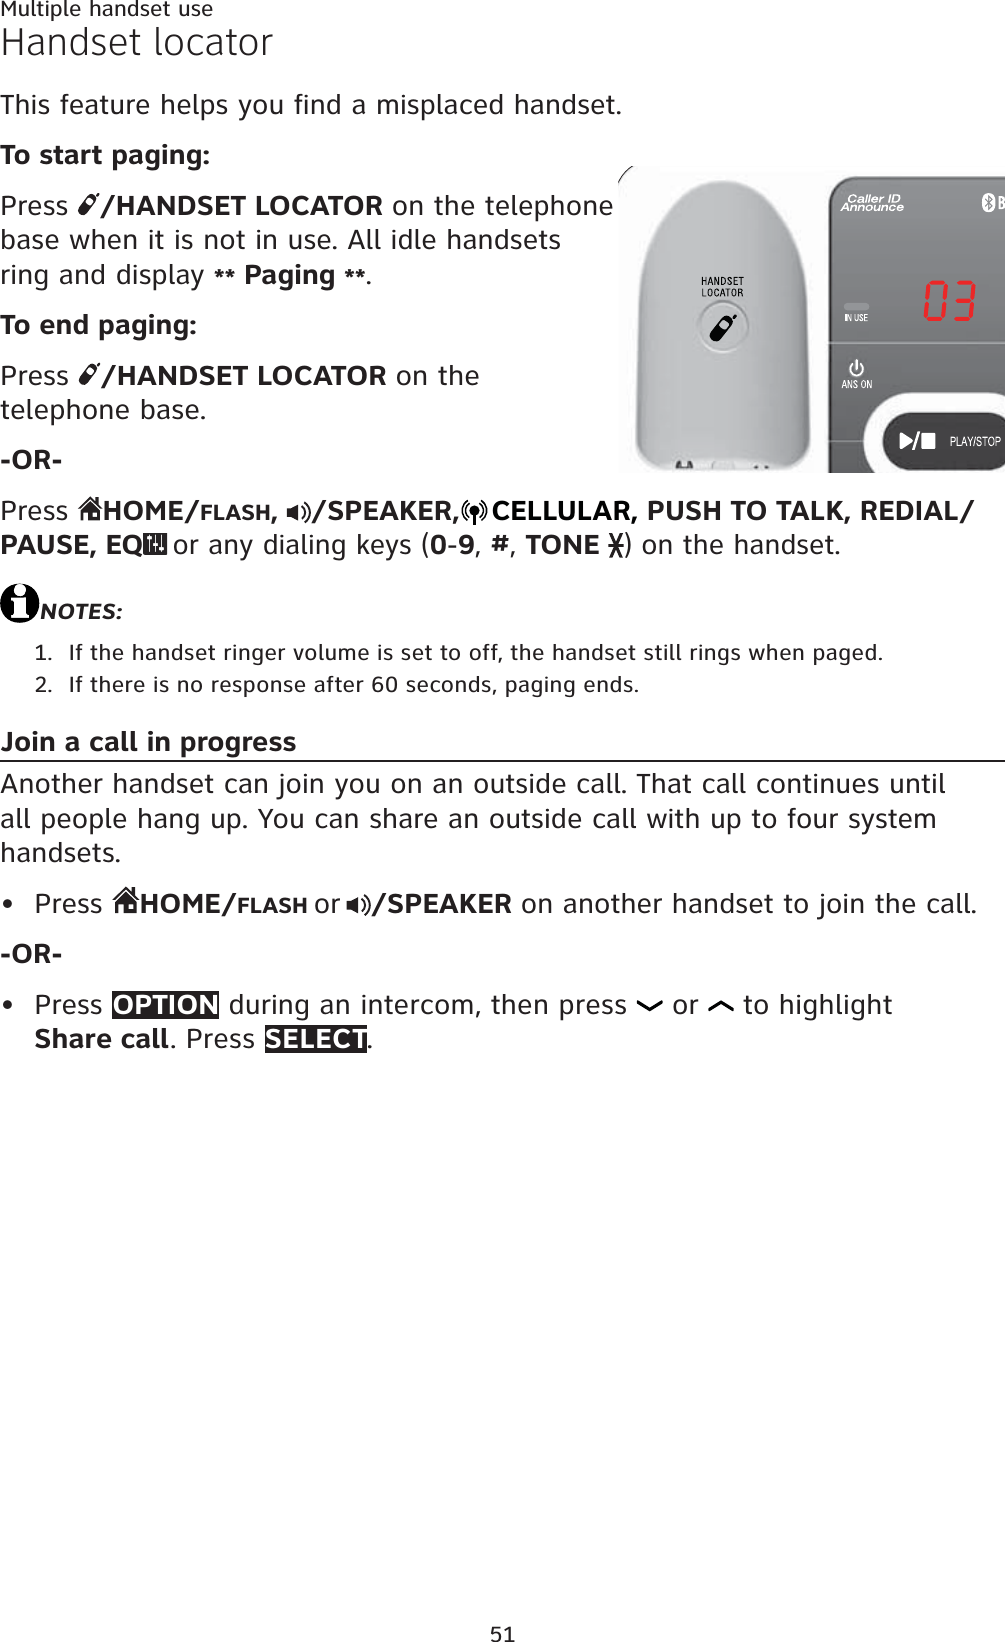 51Handset locatorThis feature helps you find a misplaced handset.To start paging:Press  /HANDSET LOCATOR on the telephone base when it is not in use. All idle handsets ring and display ** Paging **.To end paging:Press  /HANDSET LOCATOR on the telephone base.-OR-Press  HOME/FLASH,/SPEAKER, CELLULAR, PUSH TO TALK, REDIAL/PAUSE, EQor any dialing keys (0-9,#,TONE ) on the handset.NOTES:If the handset ringer volume is set to off, the handset still rings when paged.If there is no response after 60 seconds, paging ends.Join a call in progressAnother handset can join you on an outside call. That call continues until all people hang up. You can share an outside call with up to four system handsets.Press  HOME/FLASH or /SPEAKER on another handset to join the call.-OR-Press OPTION during an intercom, then press   or   to highlight Share call. Press SELECT.1.2.••Multiple handset use